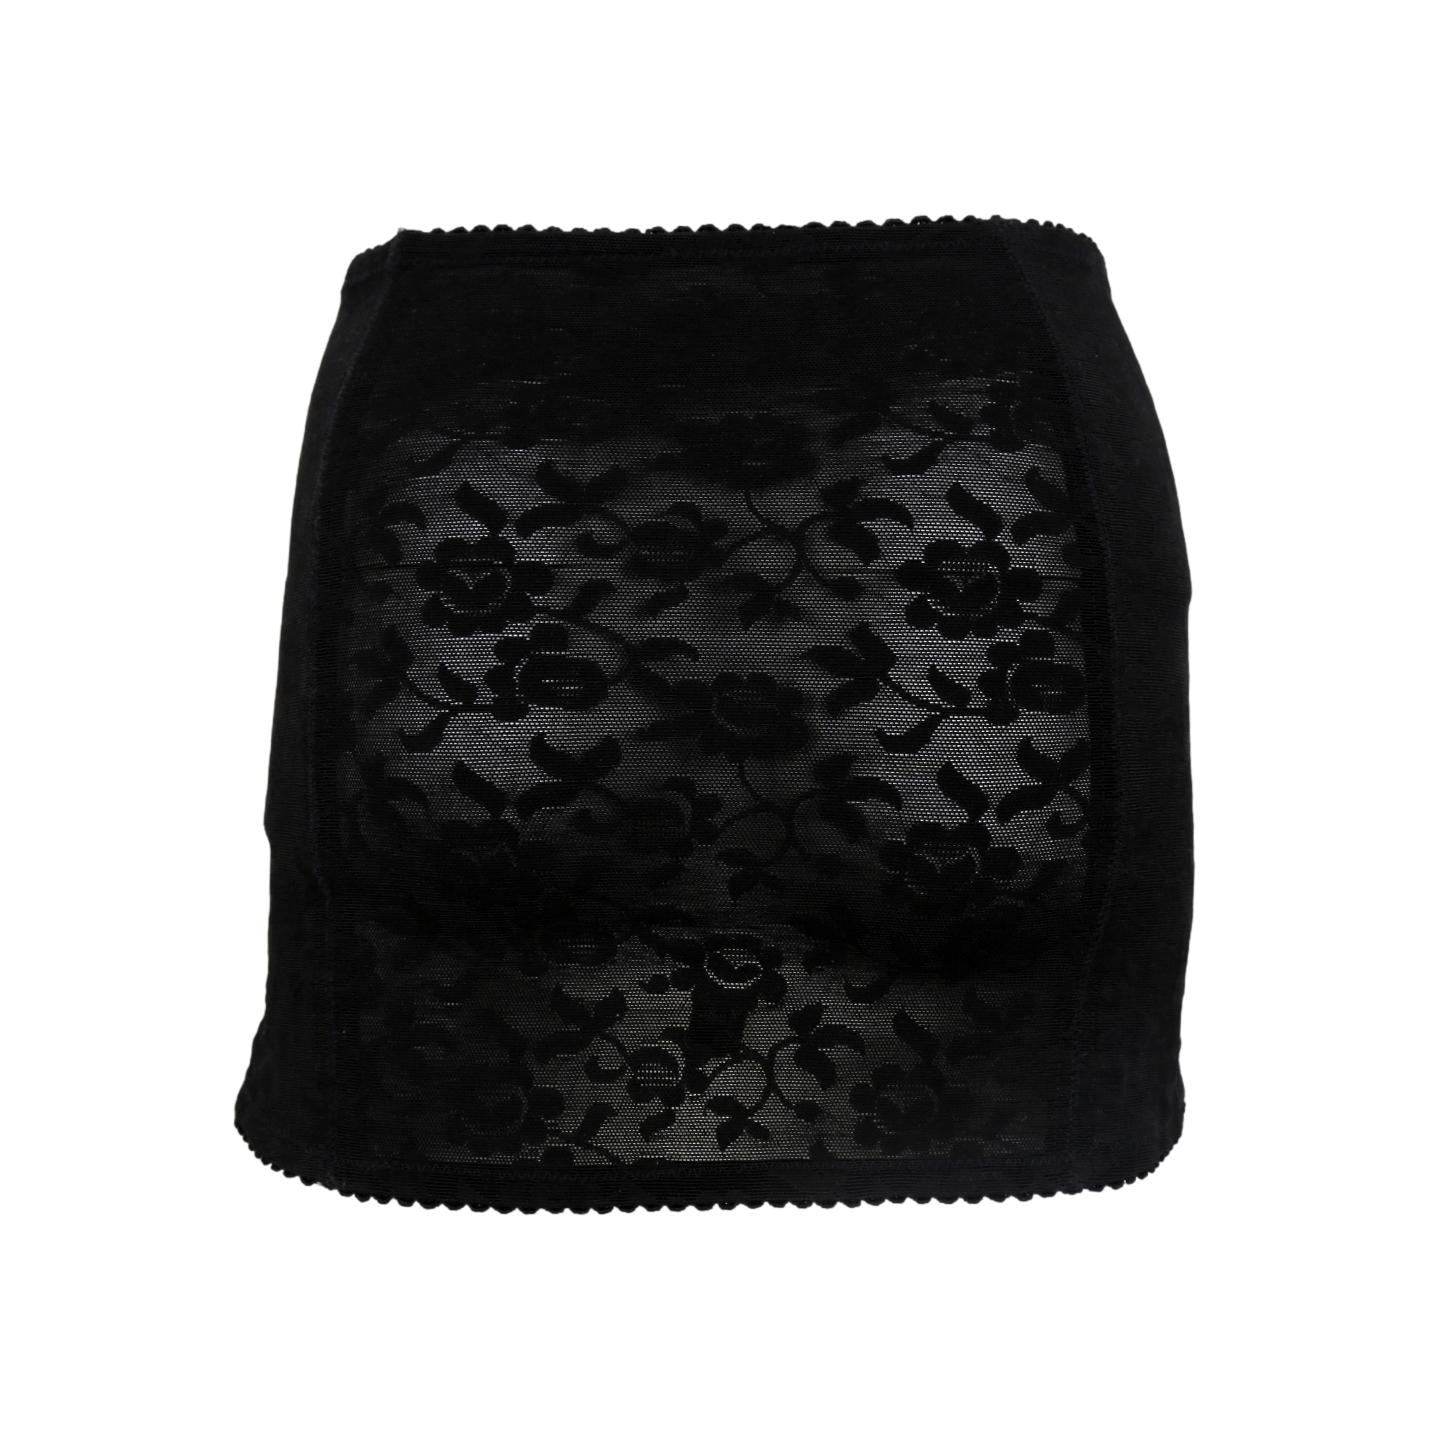 Dolce and Gabbana Black Floral Lace Skirt - Apparel